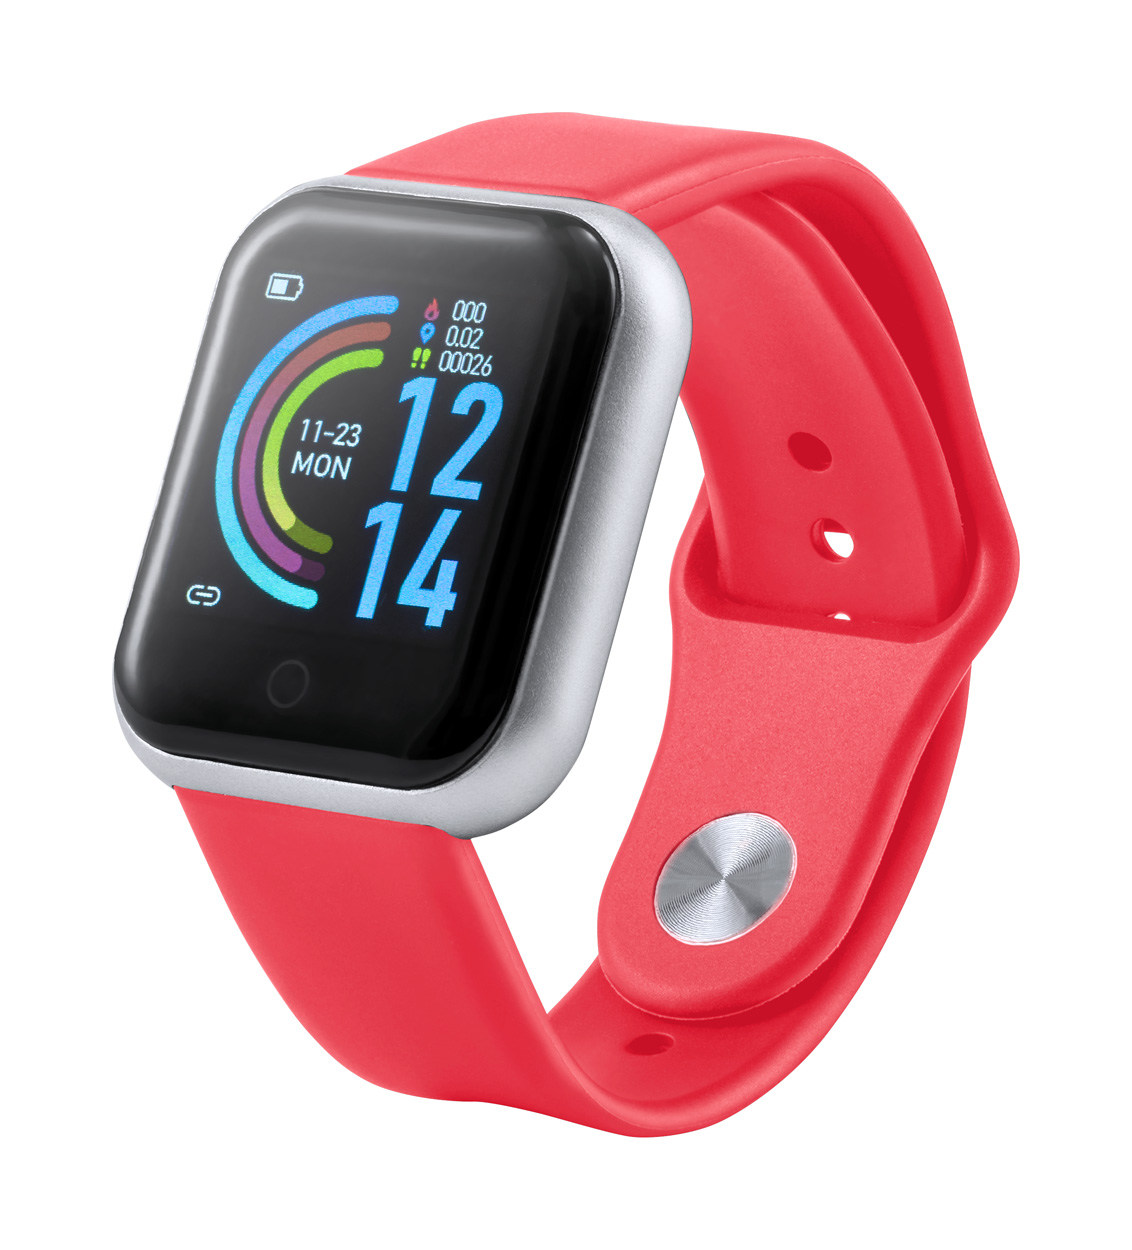 Simont smart watch - red